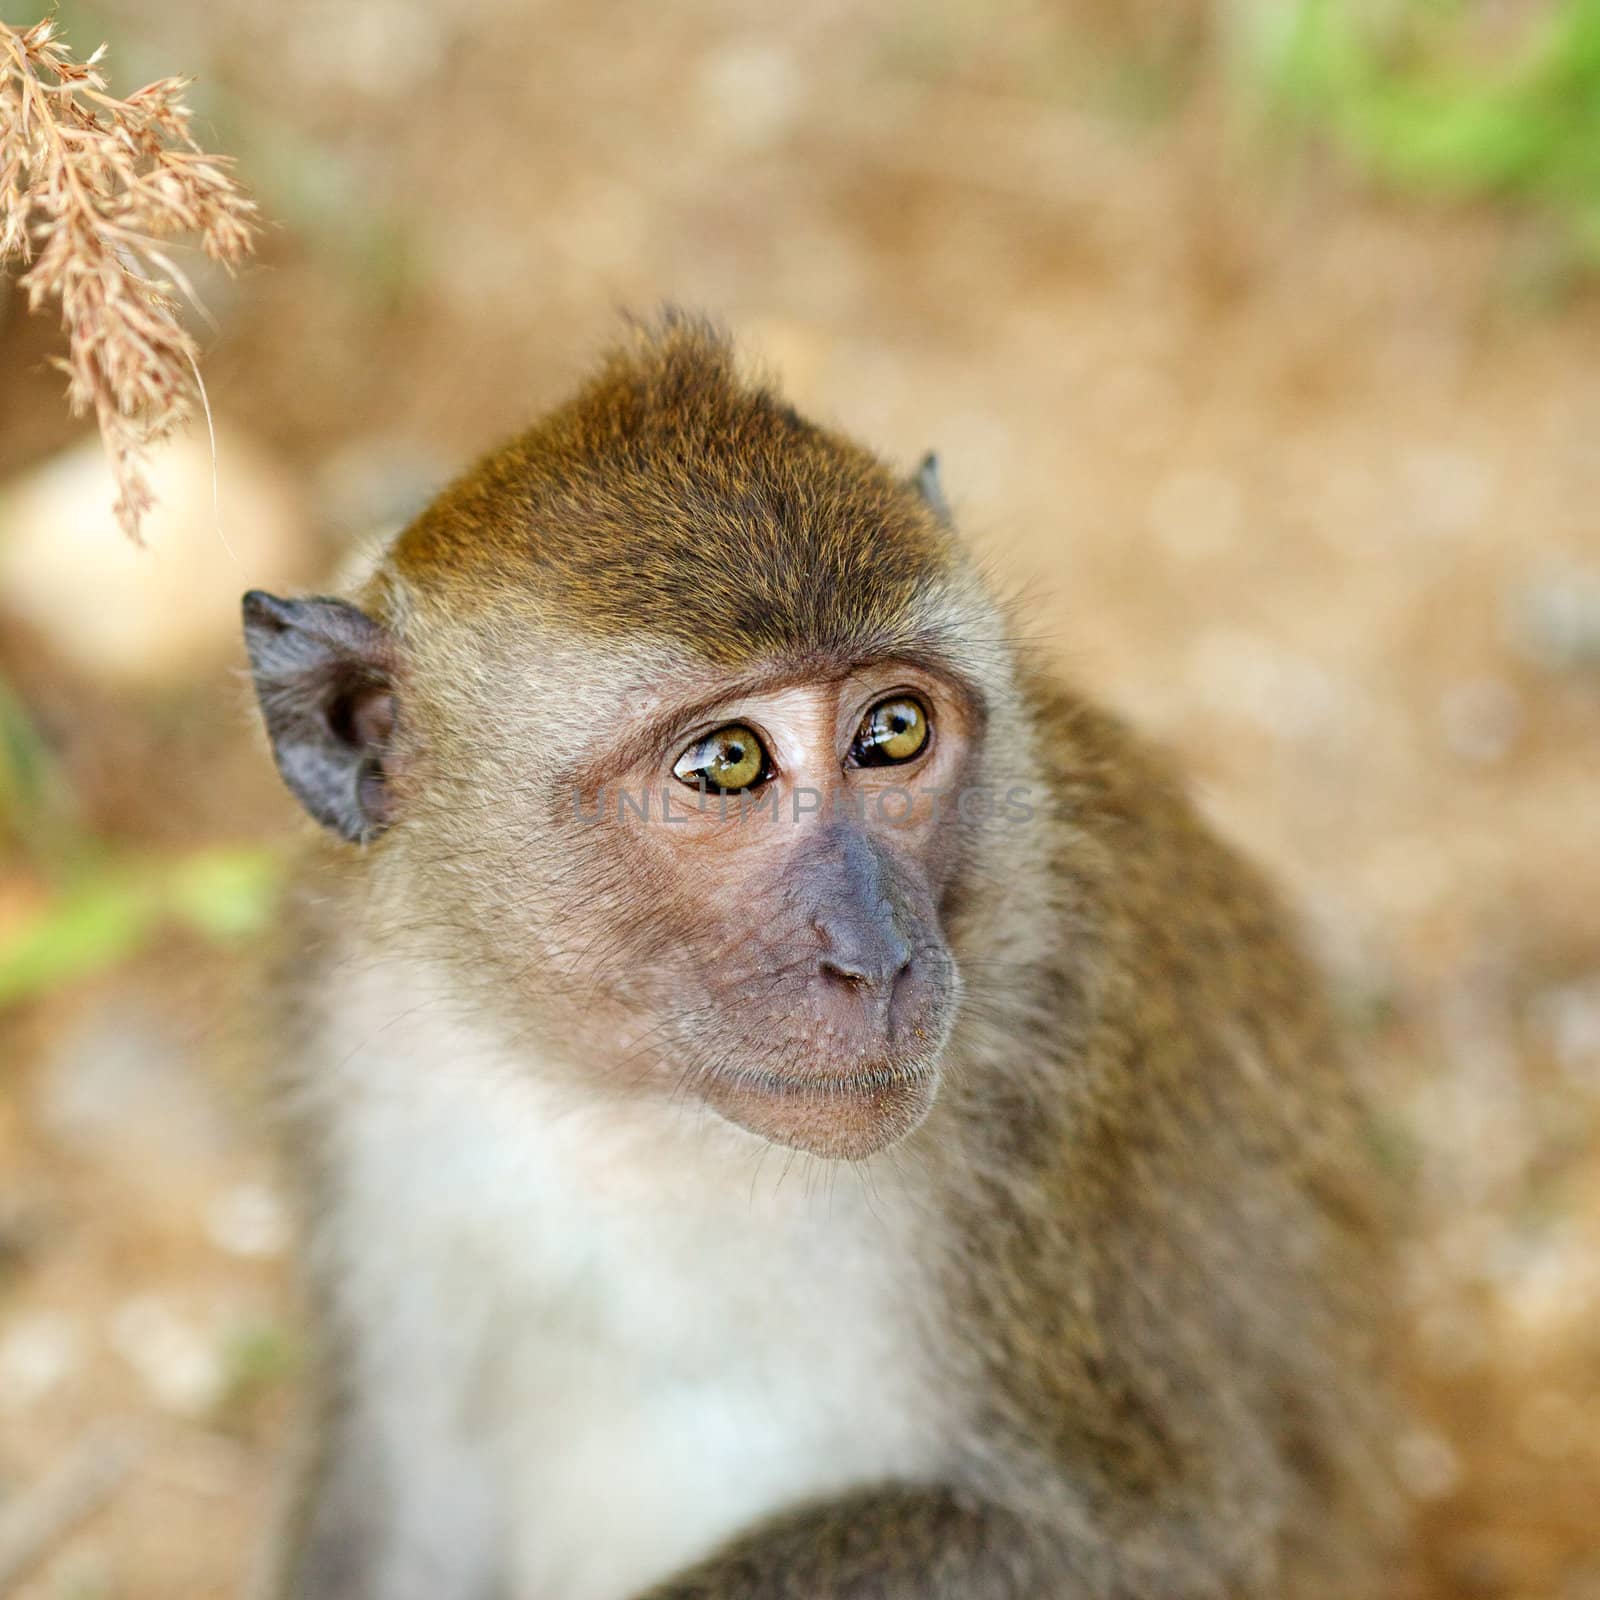 macaque monkey close up, at sunny day